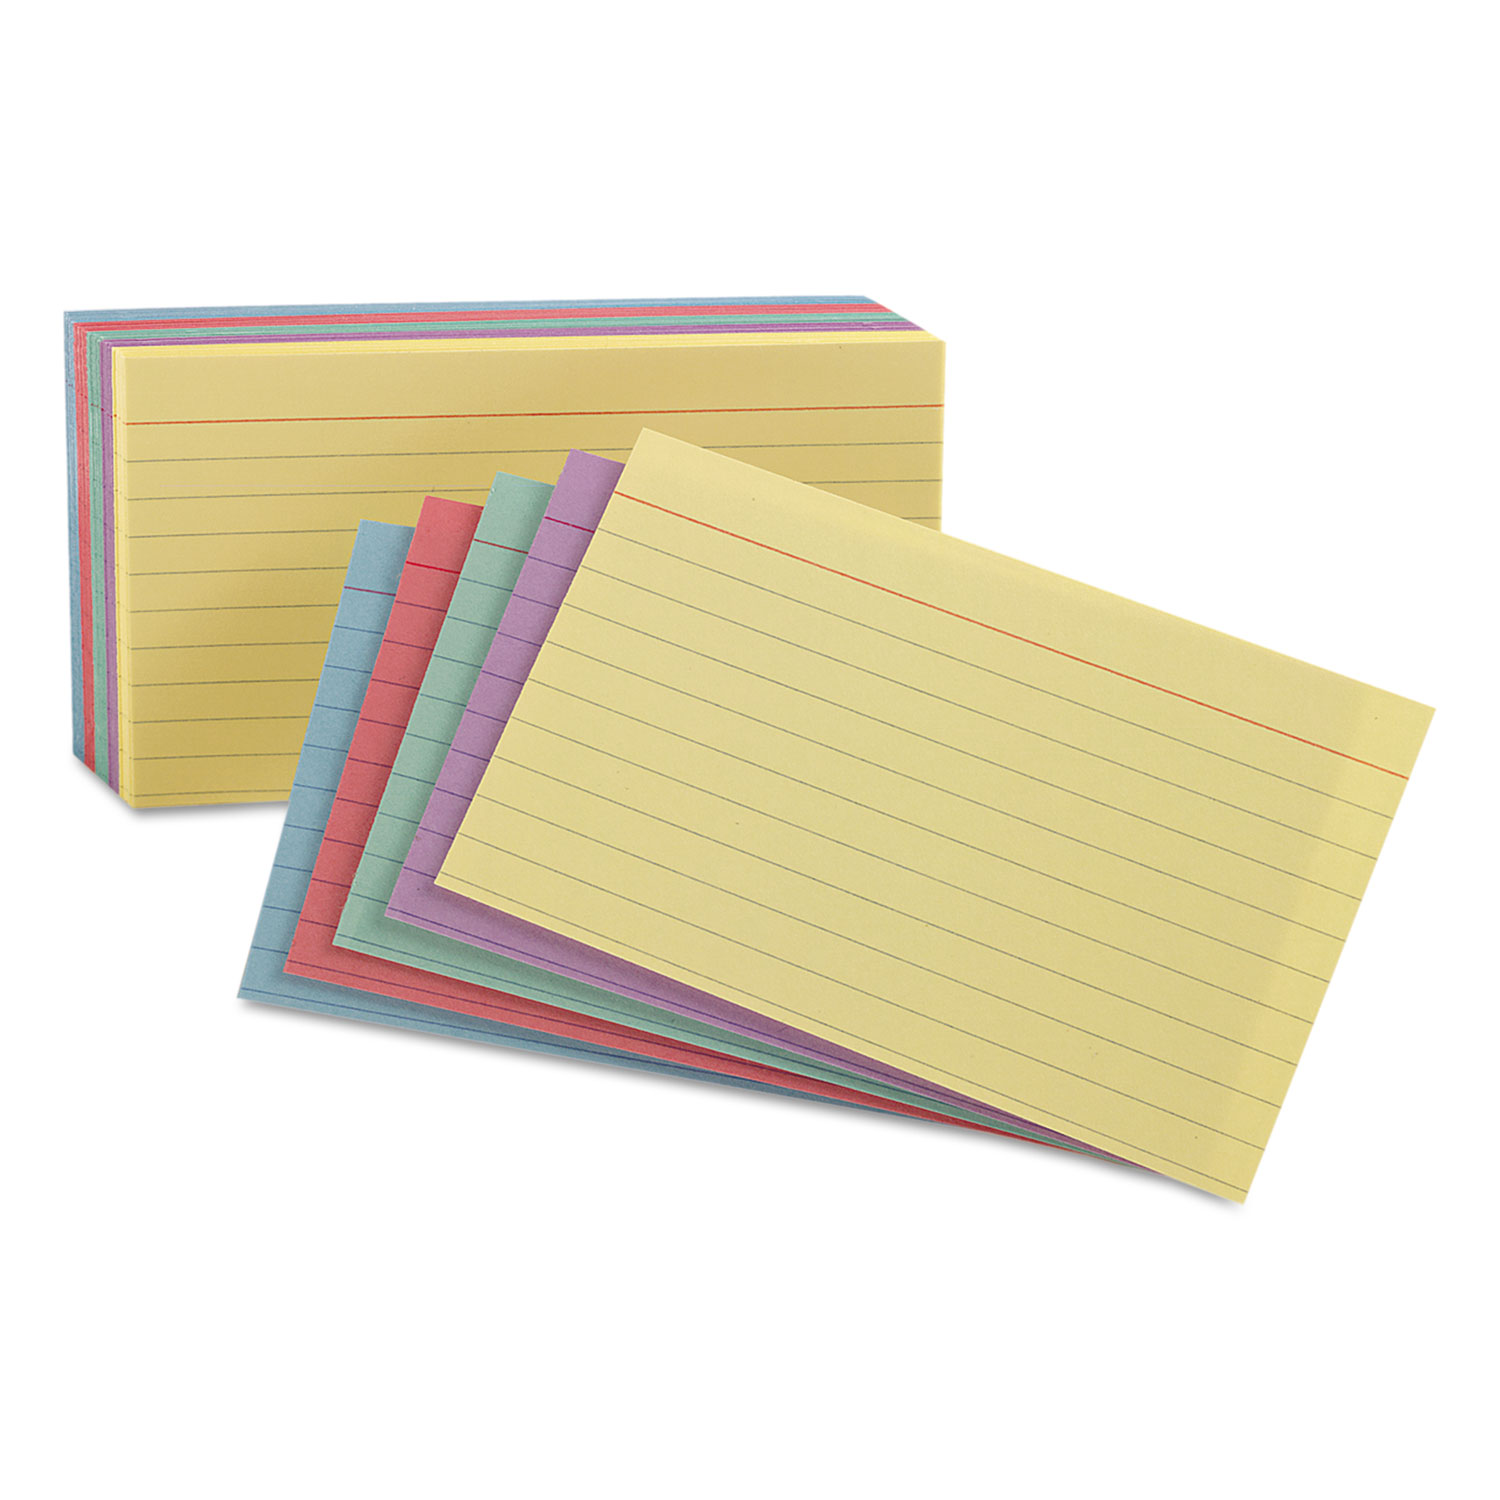 Oxford oxf35810 Ruled Index Cards, 5 x 8, Blue/Violet/Canary/Green/Cherry, 100/Pack